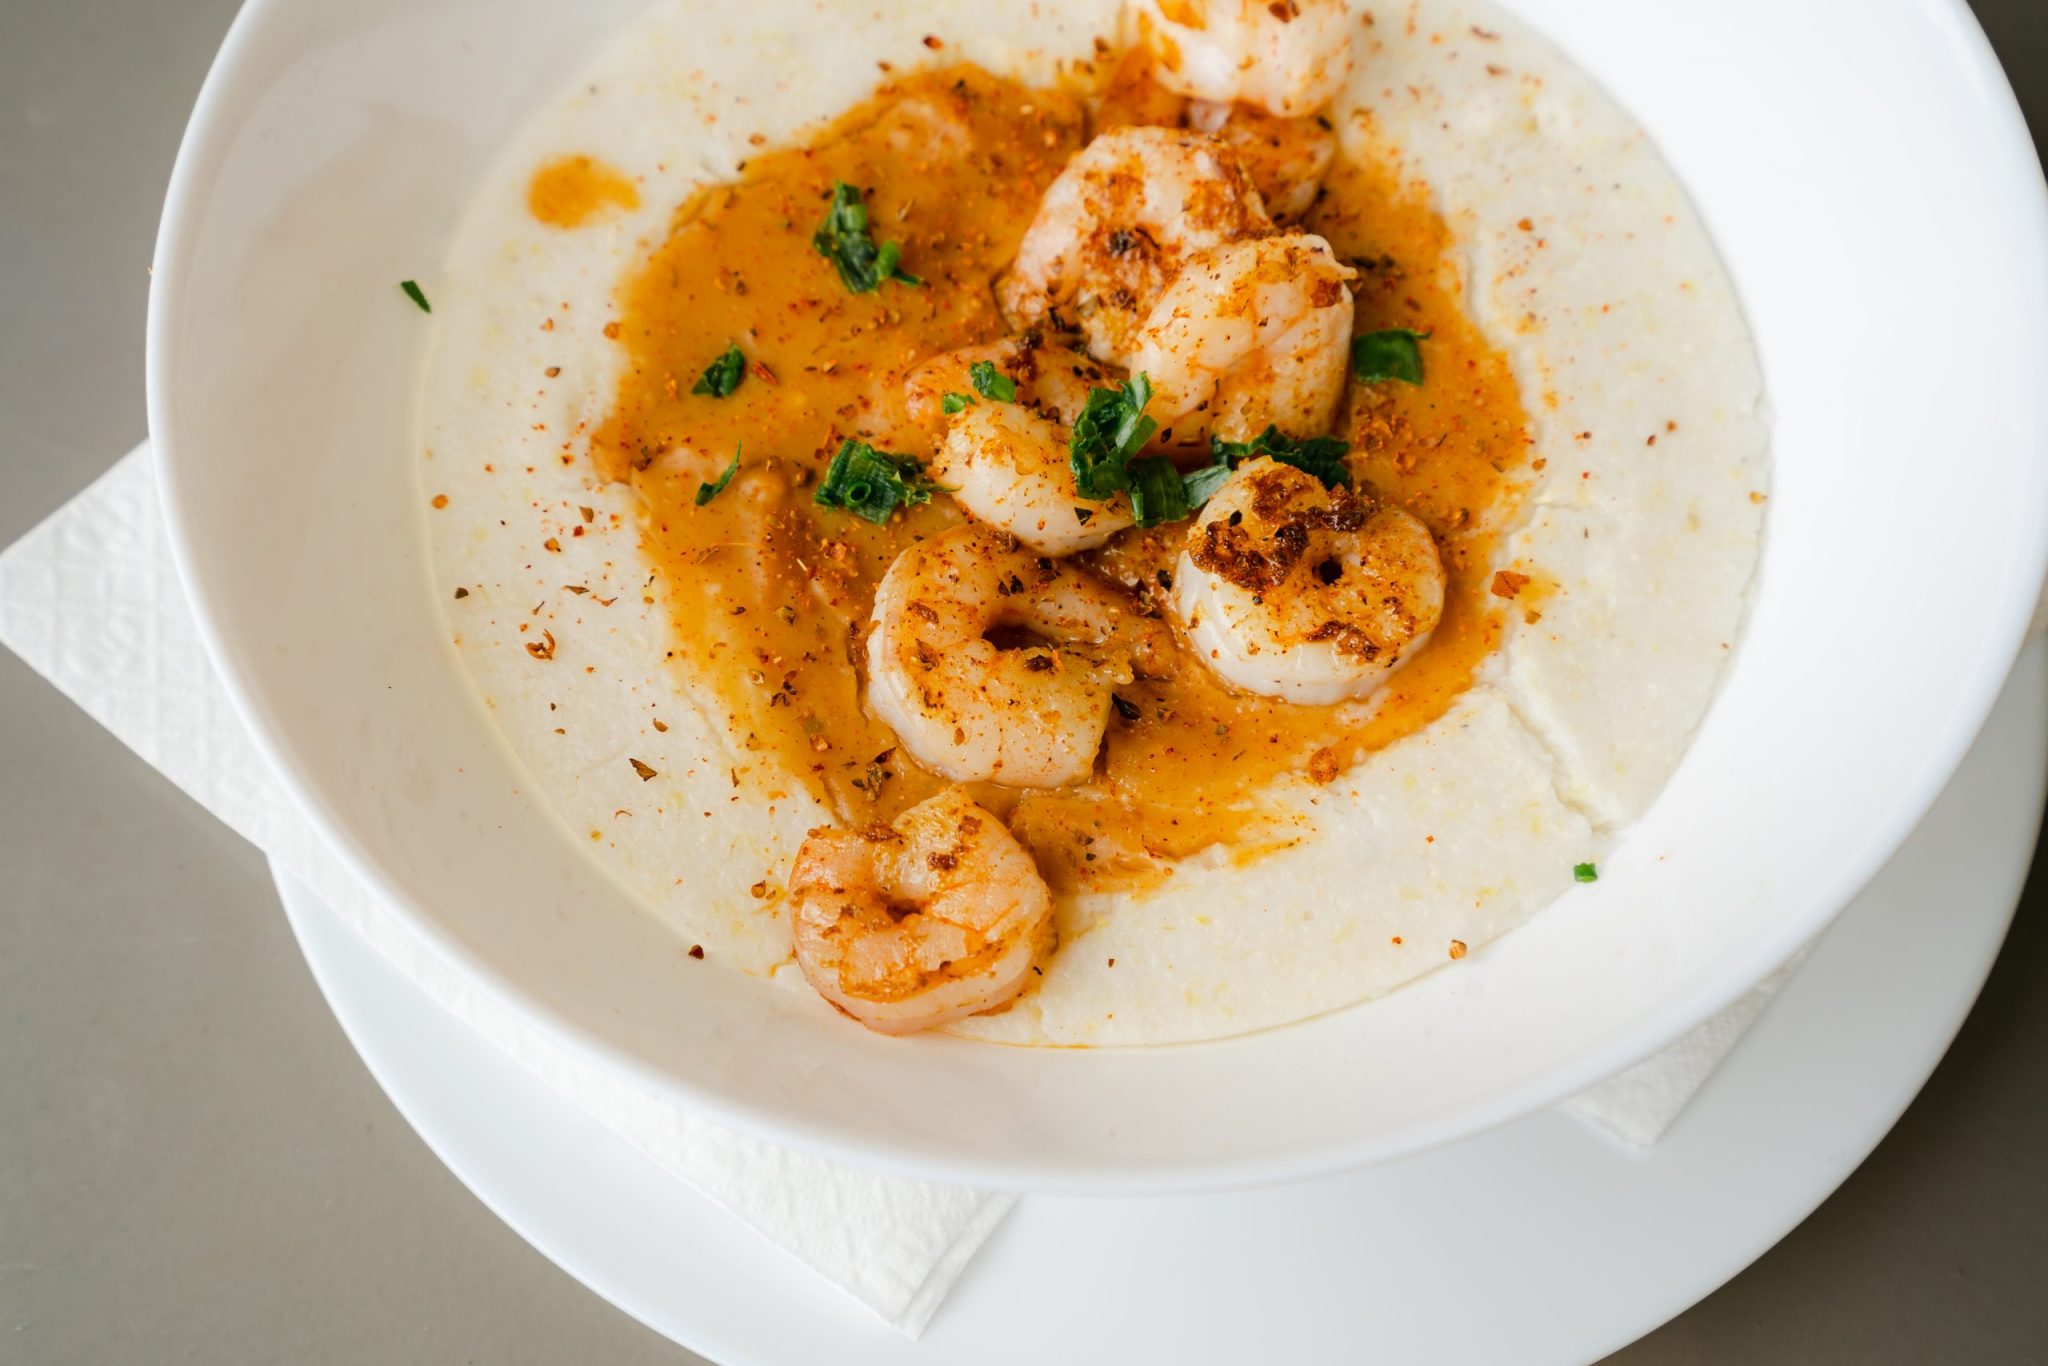 Bowl of Shrimp and Grits